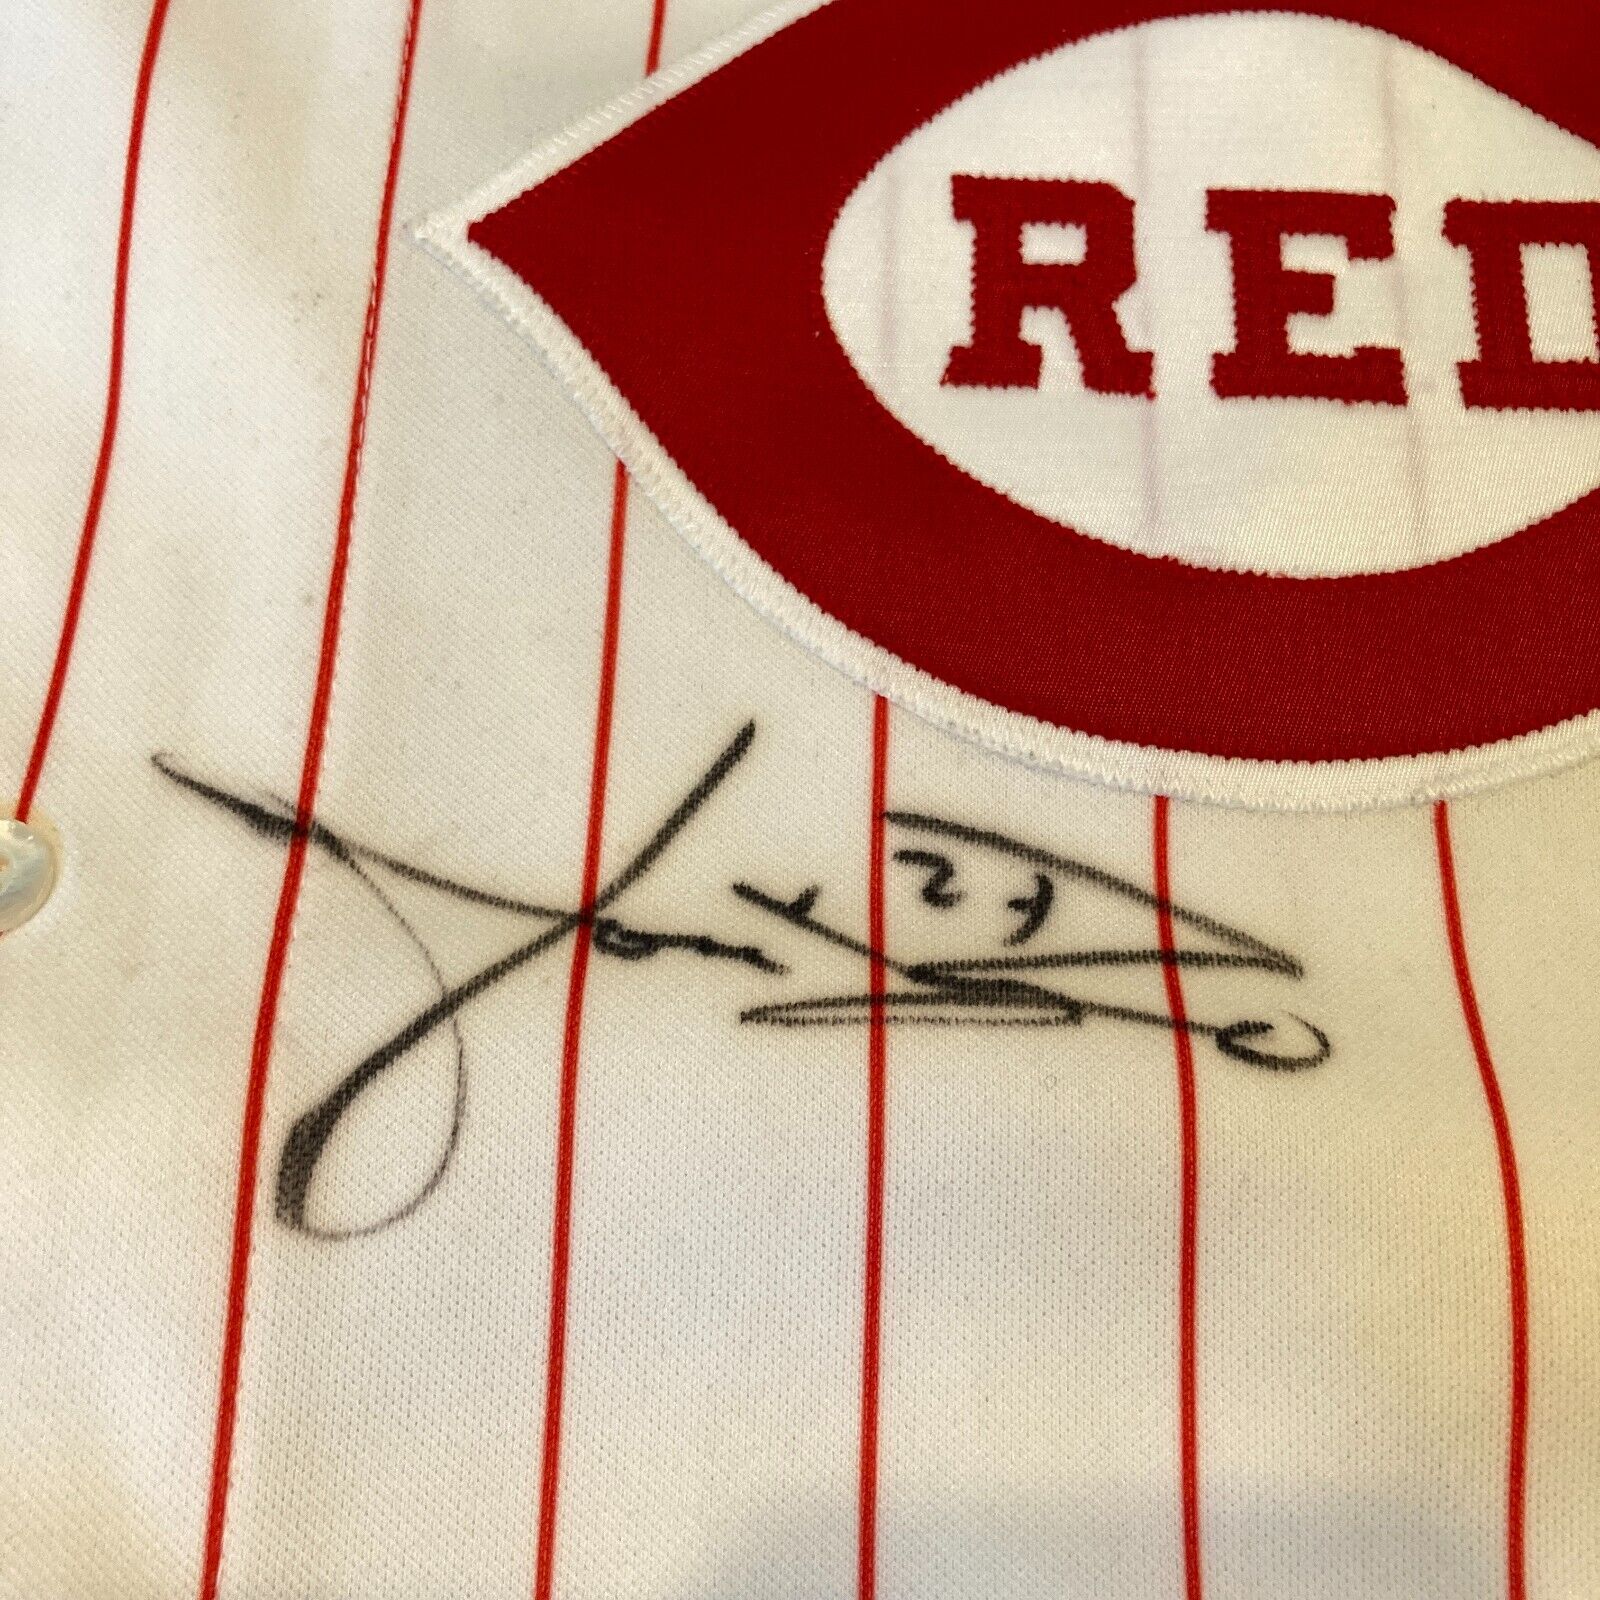 Jose Rijo Signed 1990's Cincinnati Reds Authentic Game Issued Jersey JSA COA